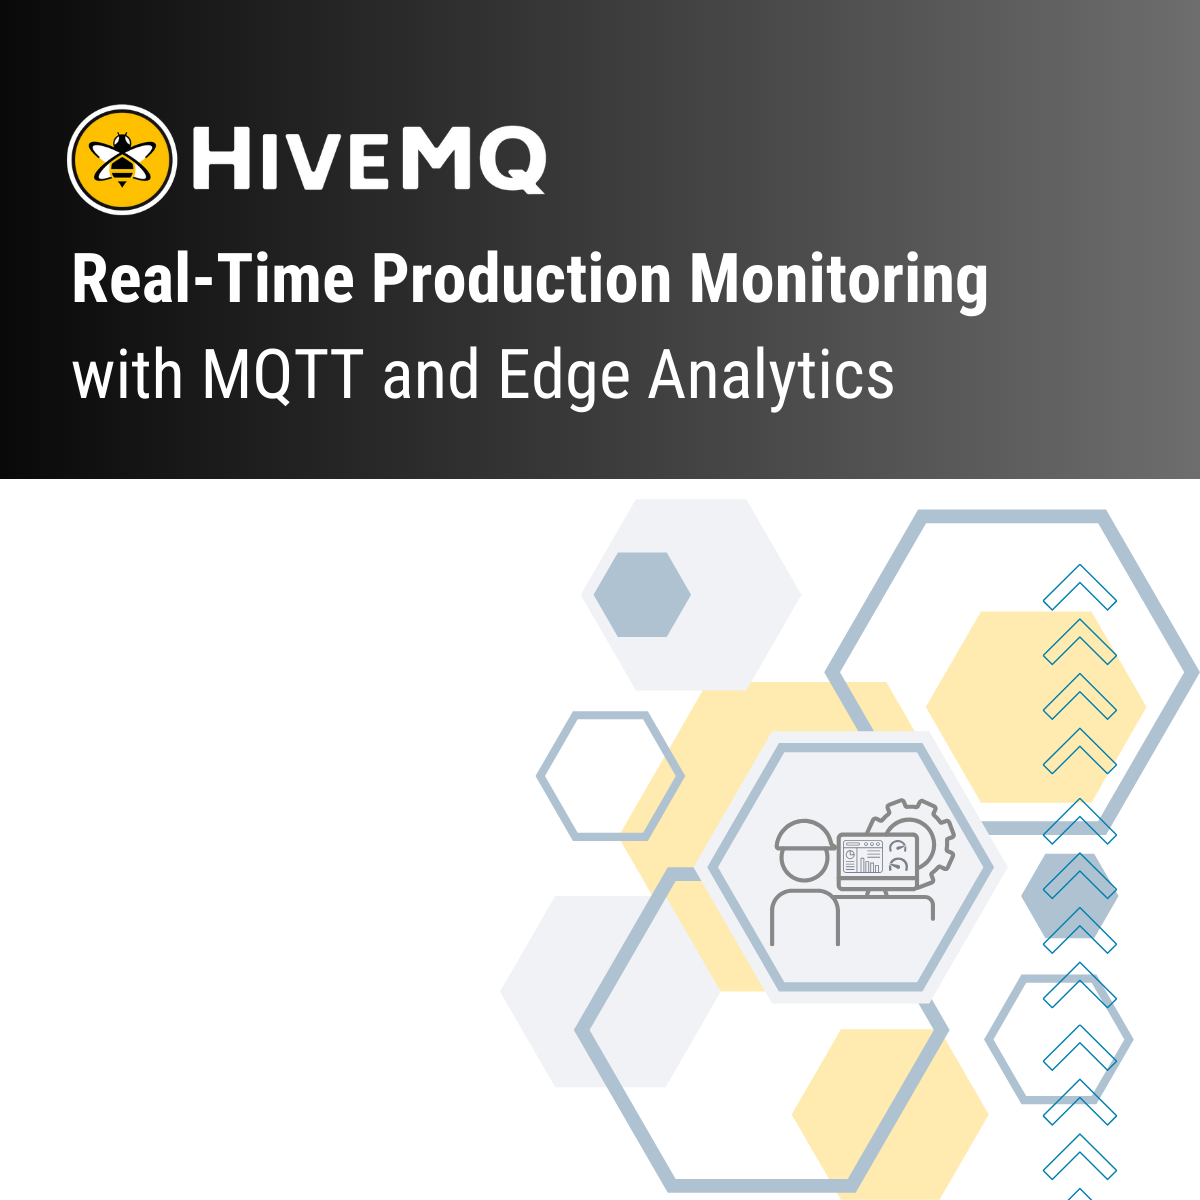 Real-Time Production Monitoring with MQTT and Edge Analytics